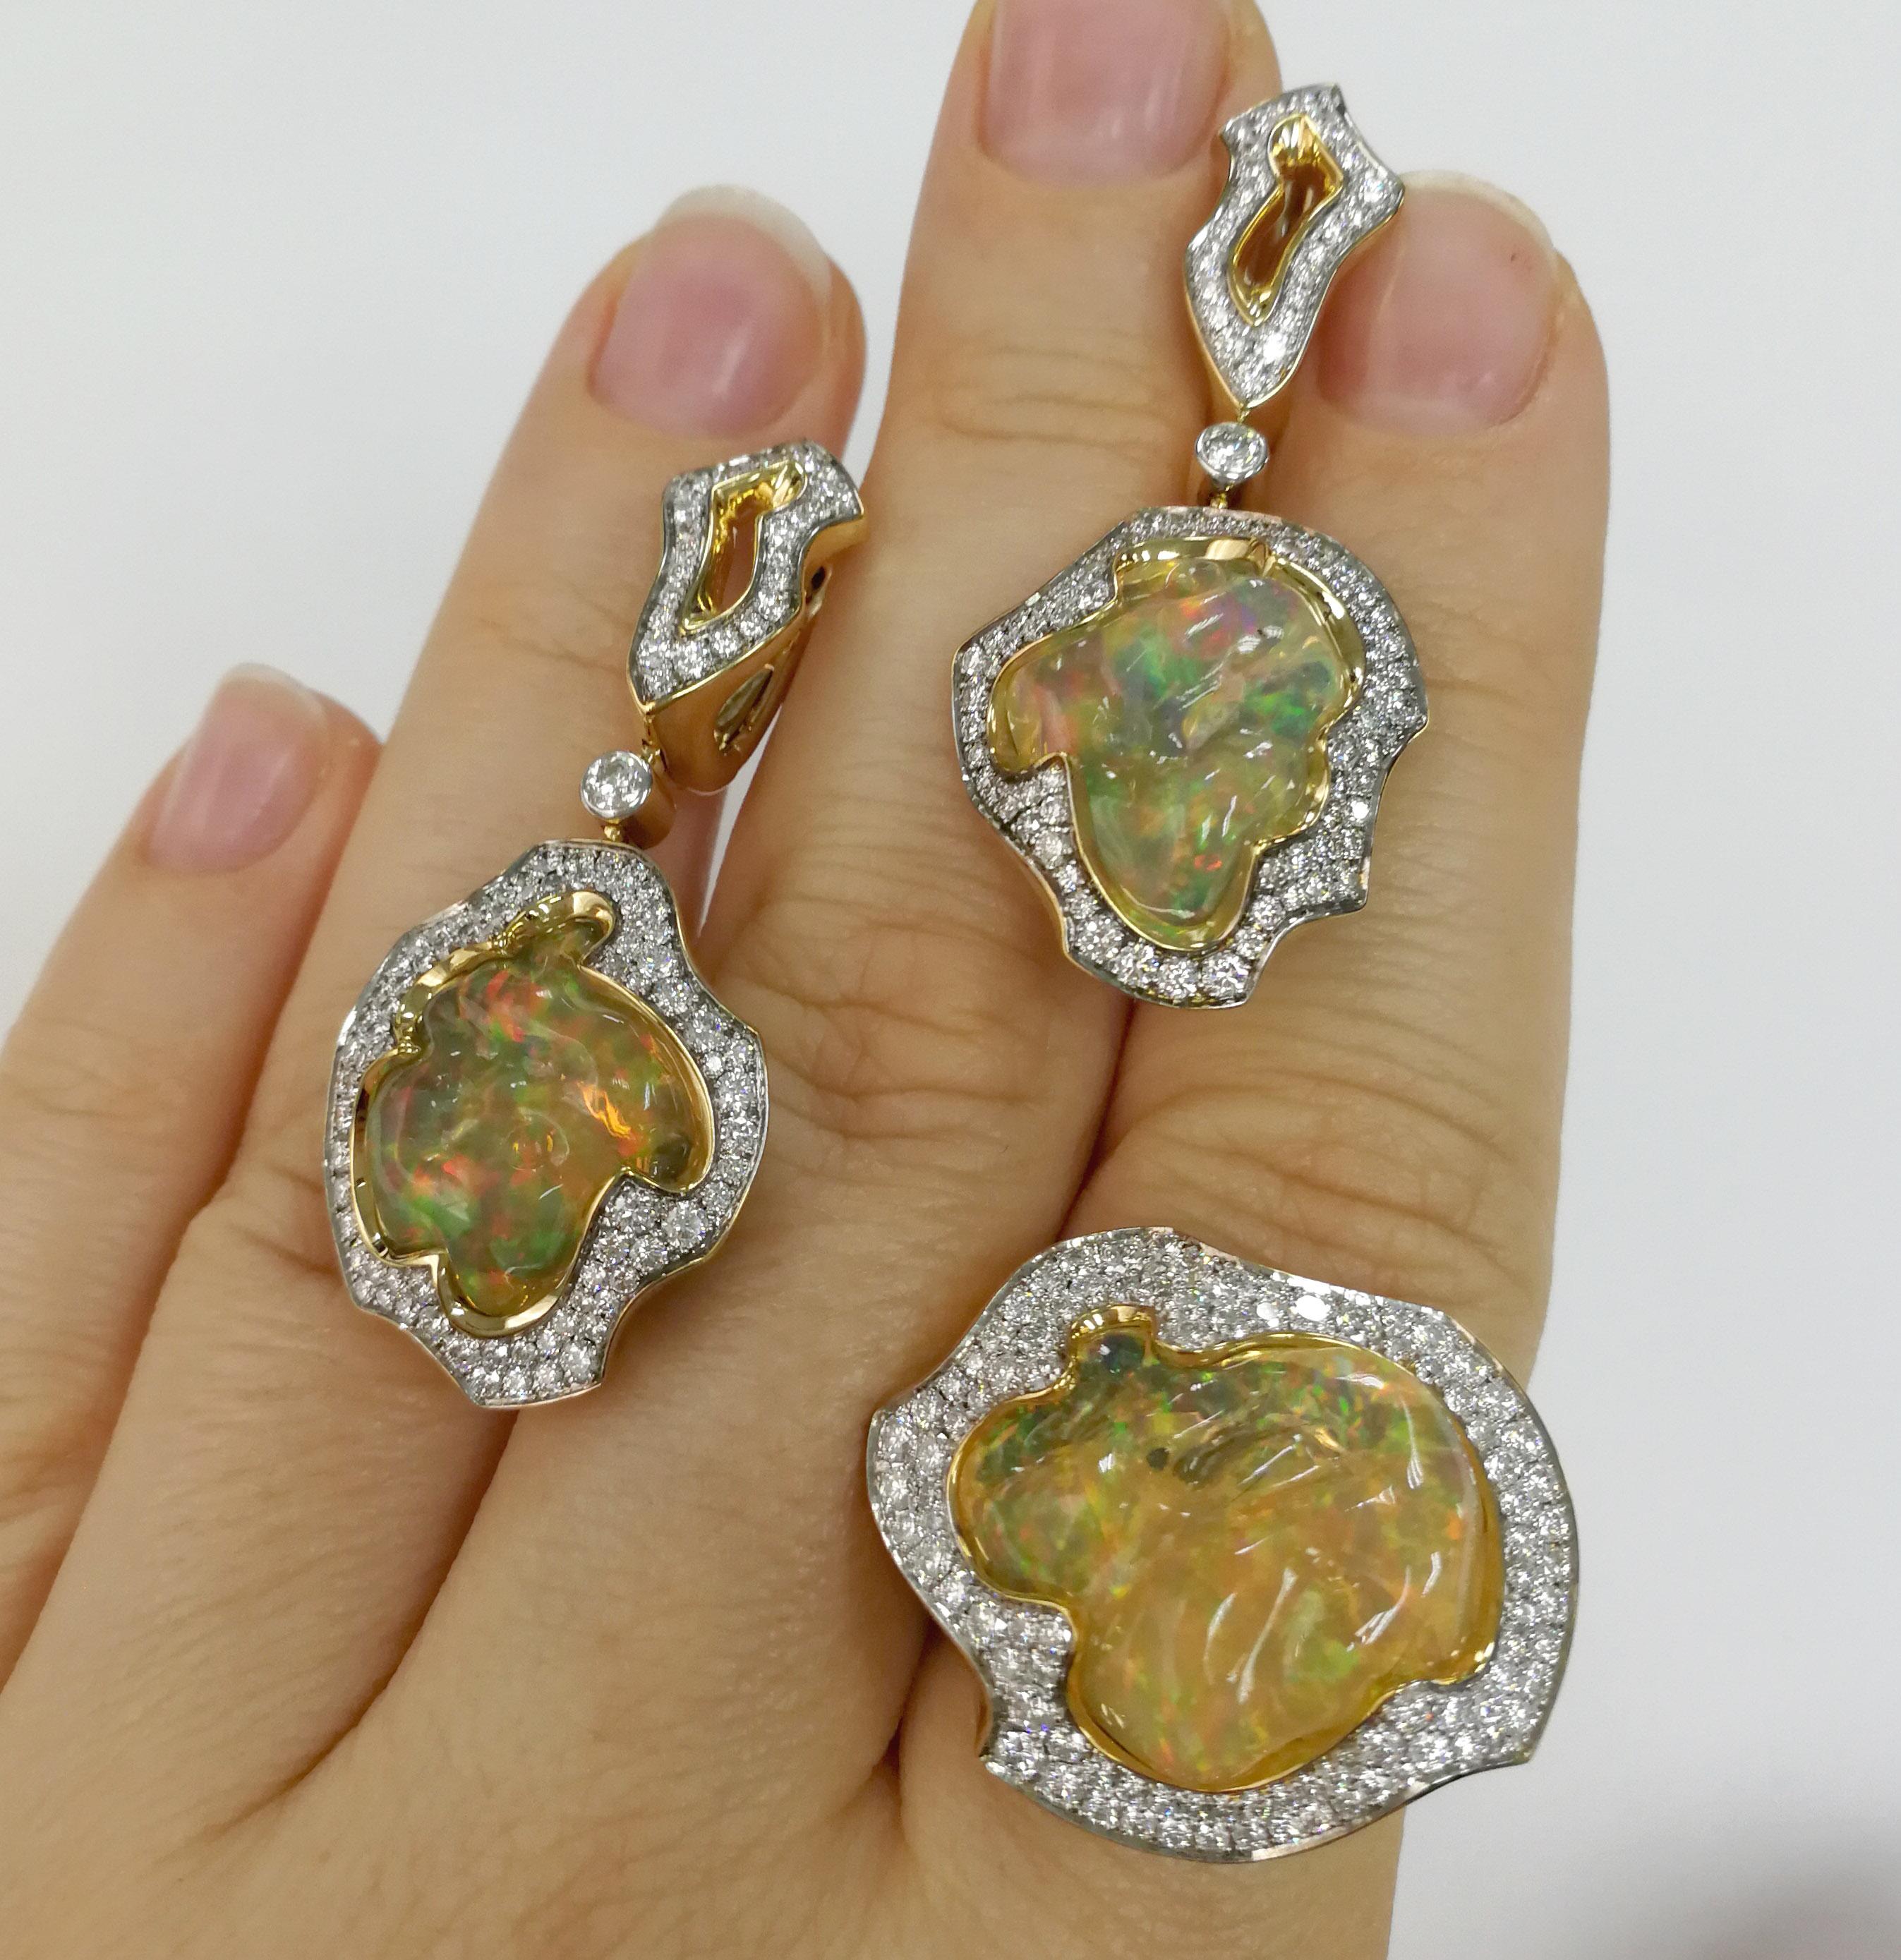 Mexican Opal 25.07 Carat Diamonds One of a Kind 18 Karat Yellow Gold Suite
Opals, unlike many other stones, are almost impossible to cut, they are always unique. Therefore, jewelry with Opals is always improvisation. It also happened with this